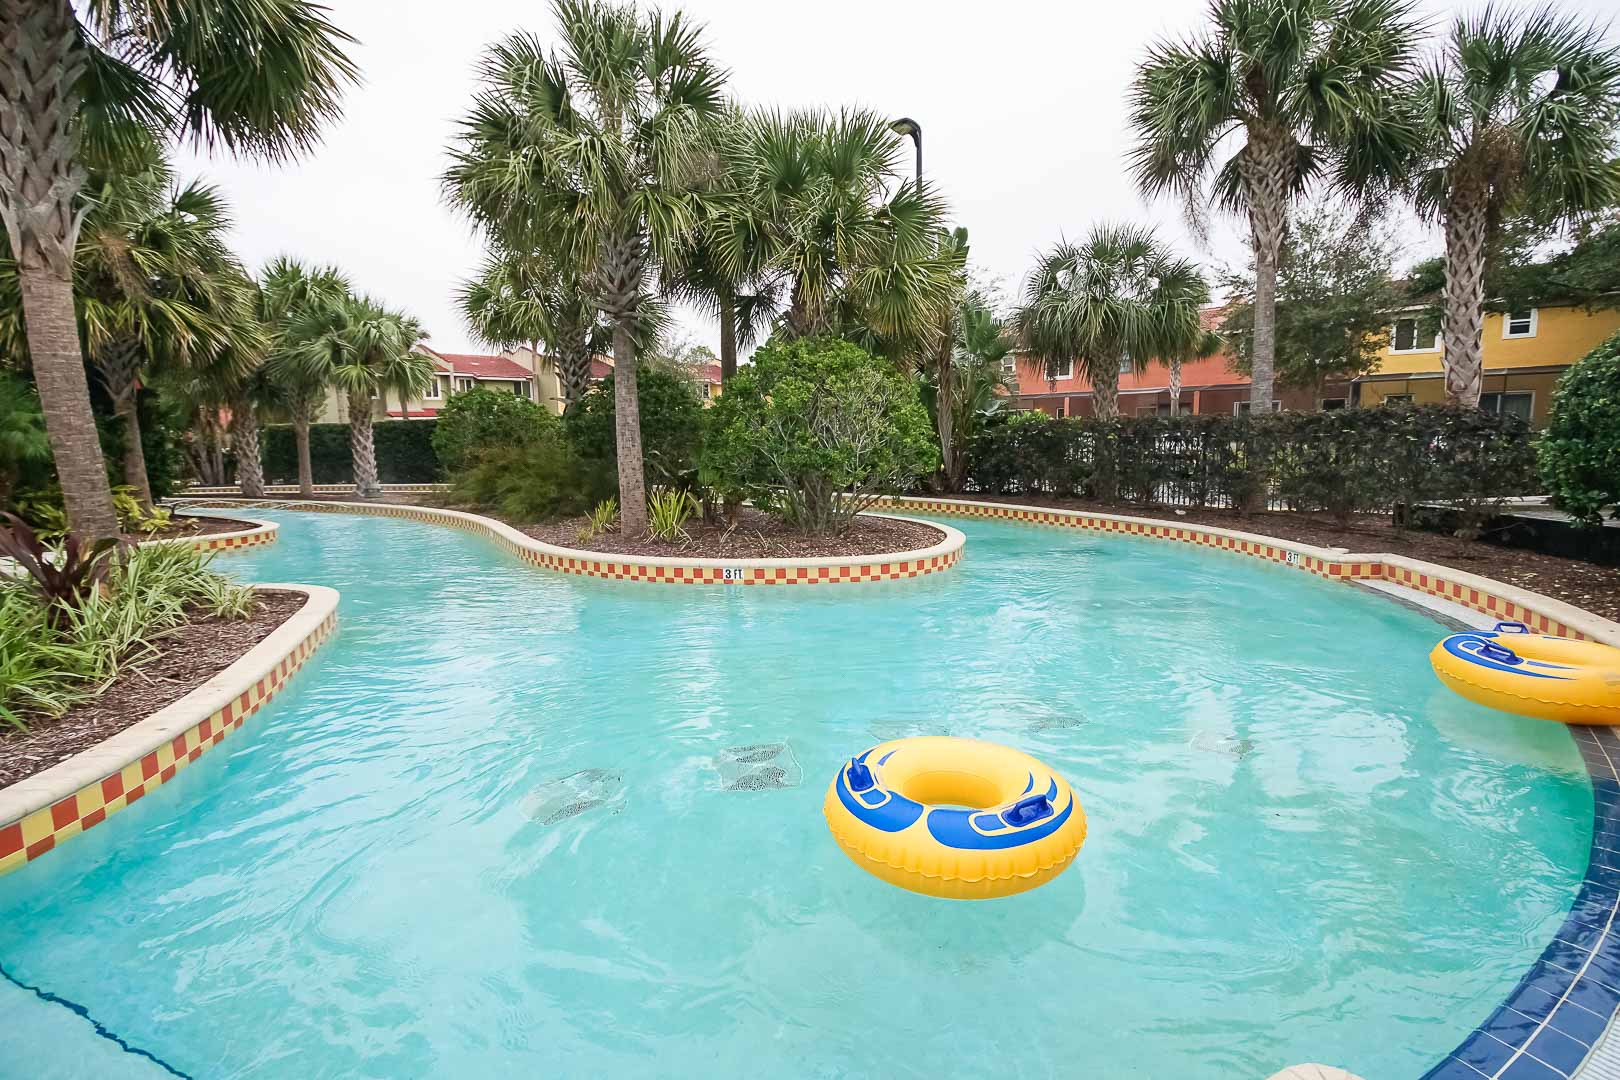 An outdoor lazy river pool at VRI's Fantasy World Resort in Florida.